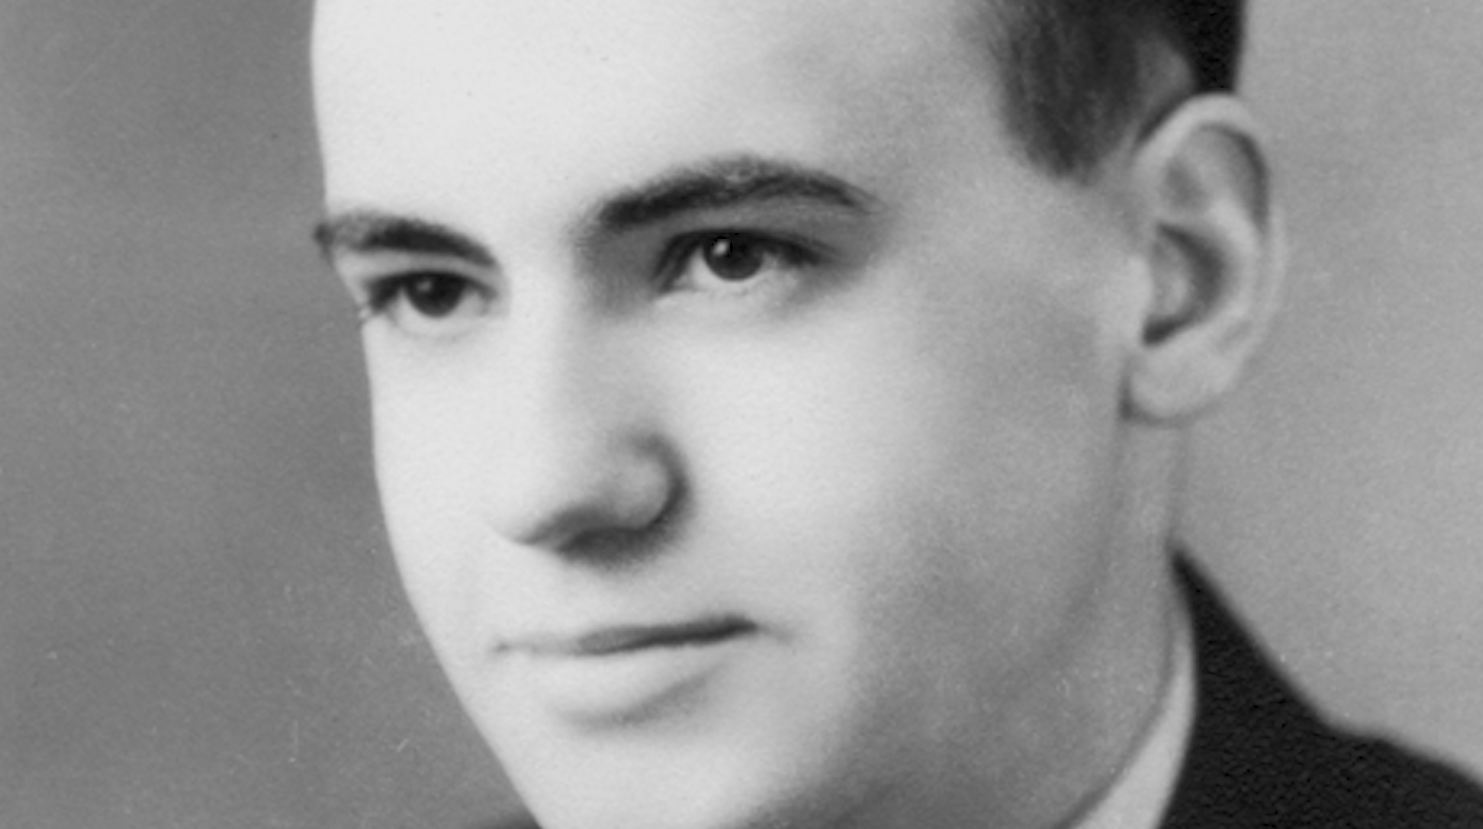 Dr. Hilleman as young man